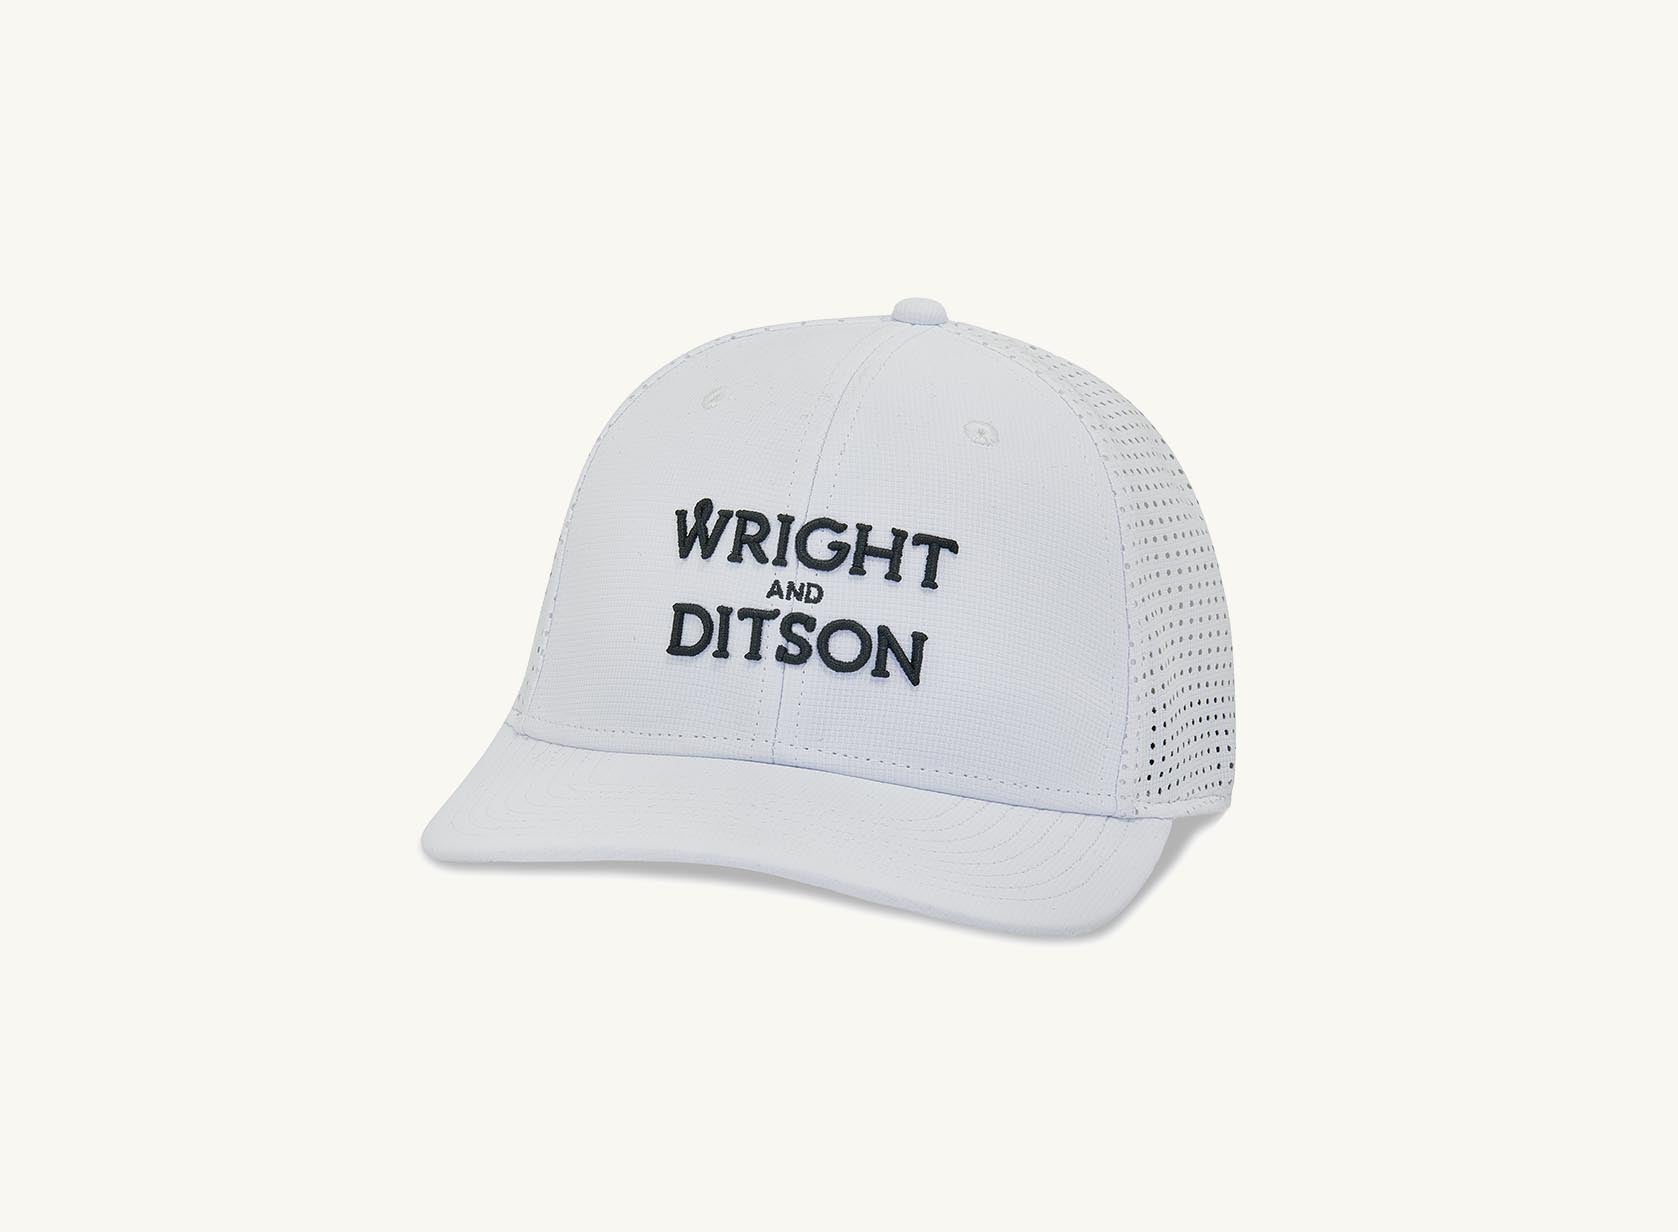 white Wright and Ditson hat